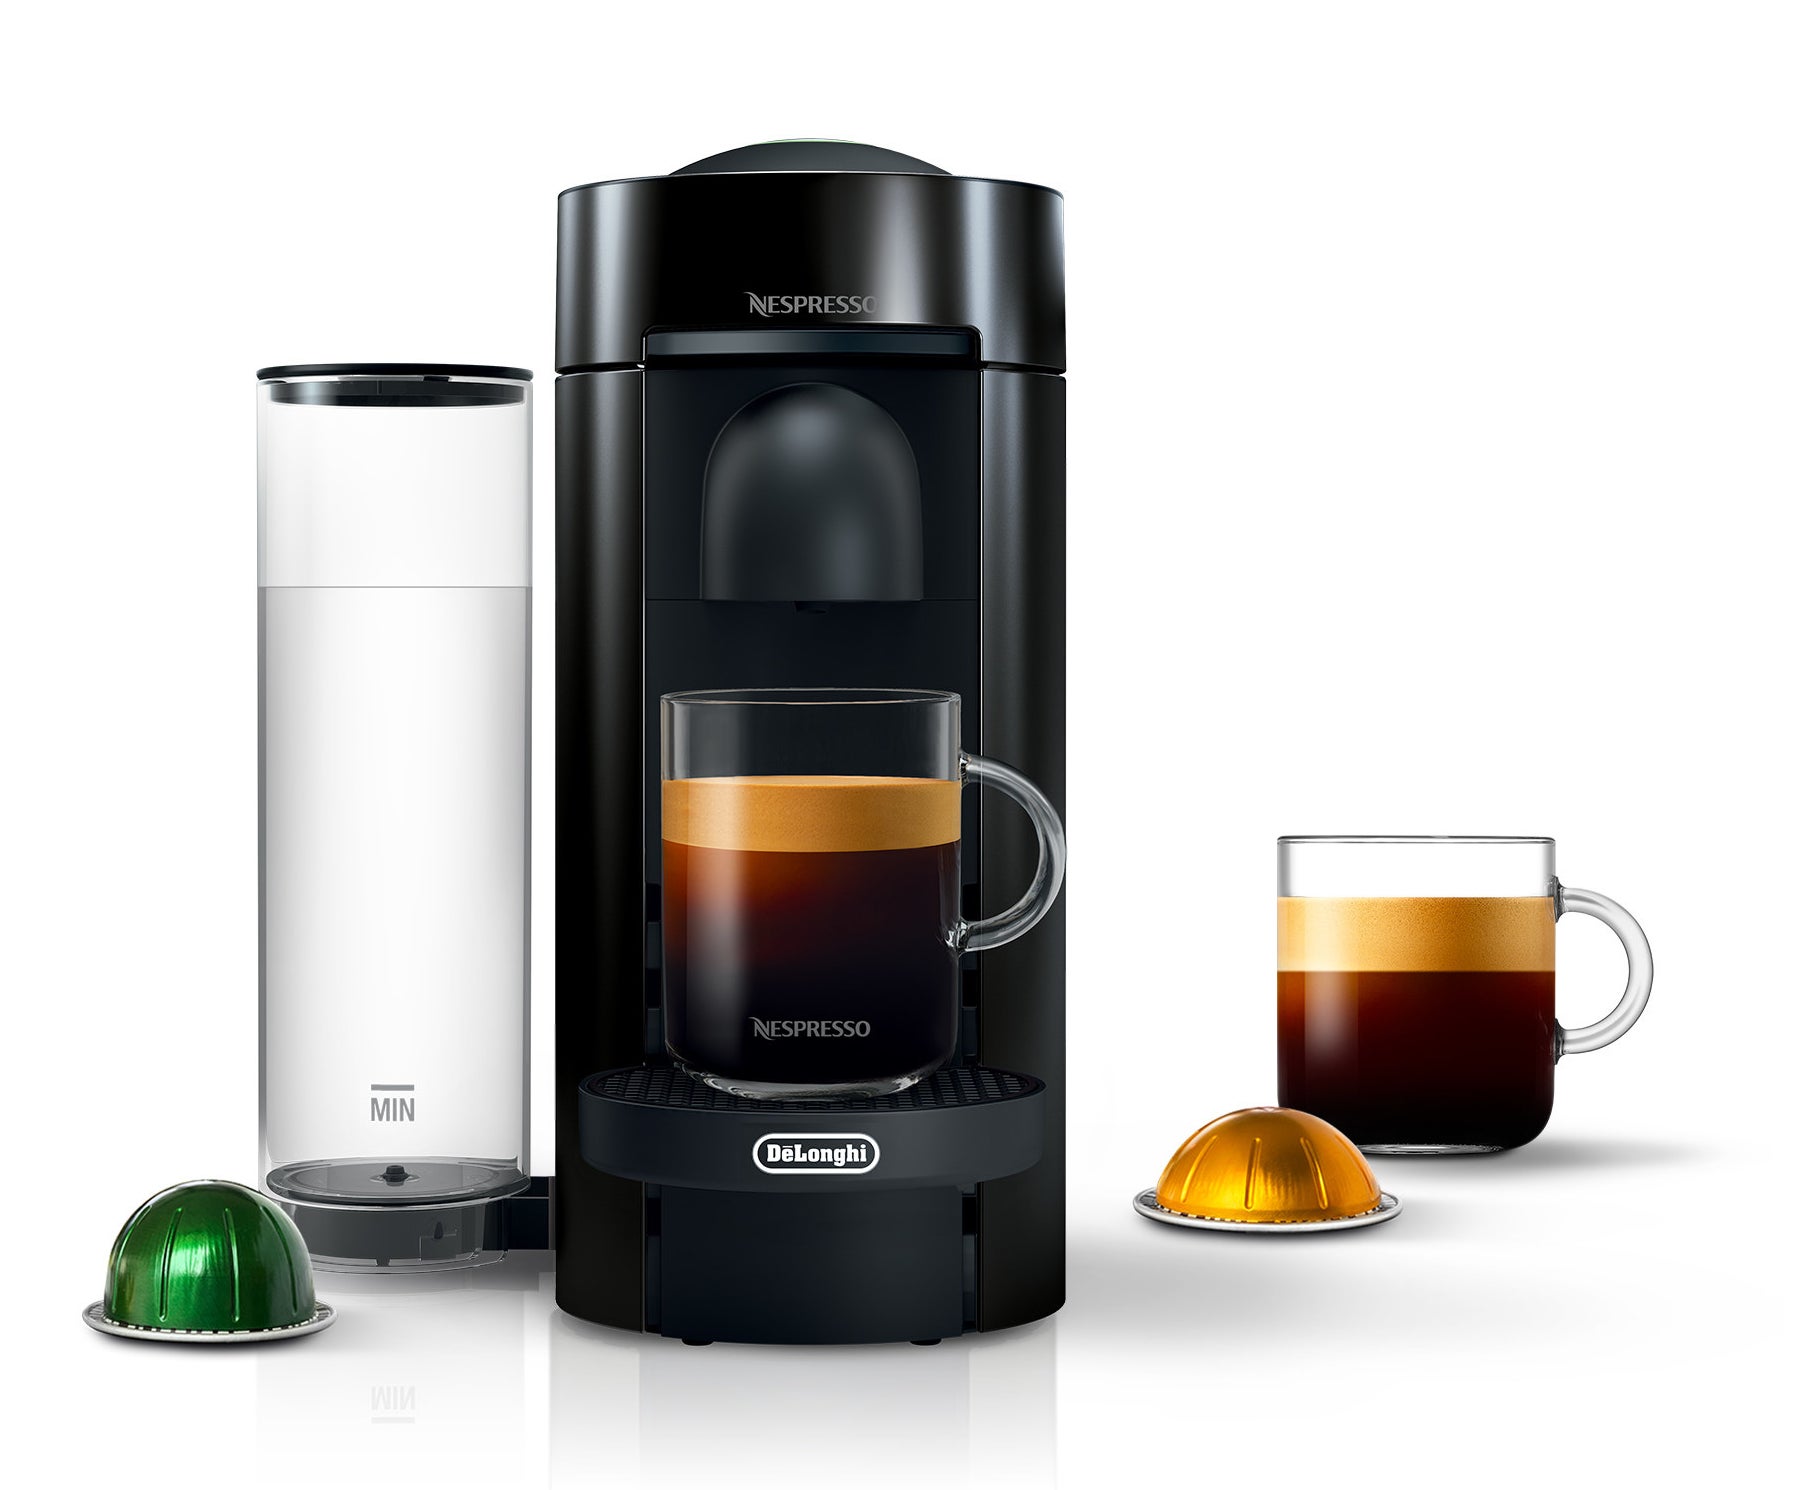 Nespresso coffee and espresso maker with coffee cups and pods